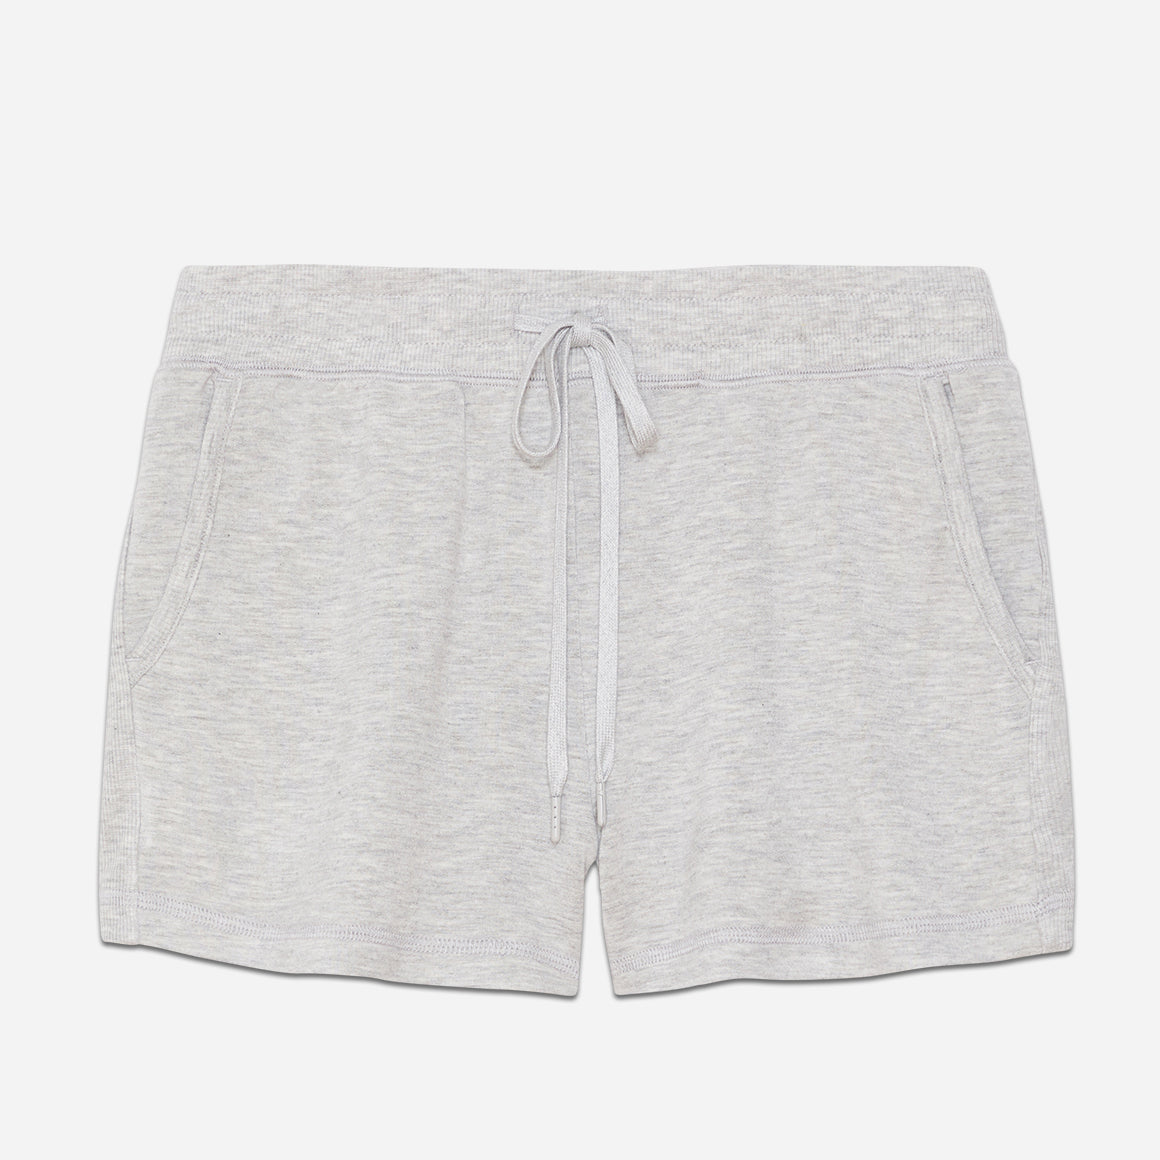 Crafted from a soft blended fabric with a touch of stretch, this lounge short offers a sumptuously soft and lightweight feel against your skin. The breathable fabric ensures optimal airflow, keeping you cool and comfortable throughout the night or during cozy mornings at home. This pj short has a cozy fit that features side seam pockets and a comfortable elastic waistband with drawstring for a personalized fit, allowing you to move freely and unrestricted.